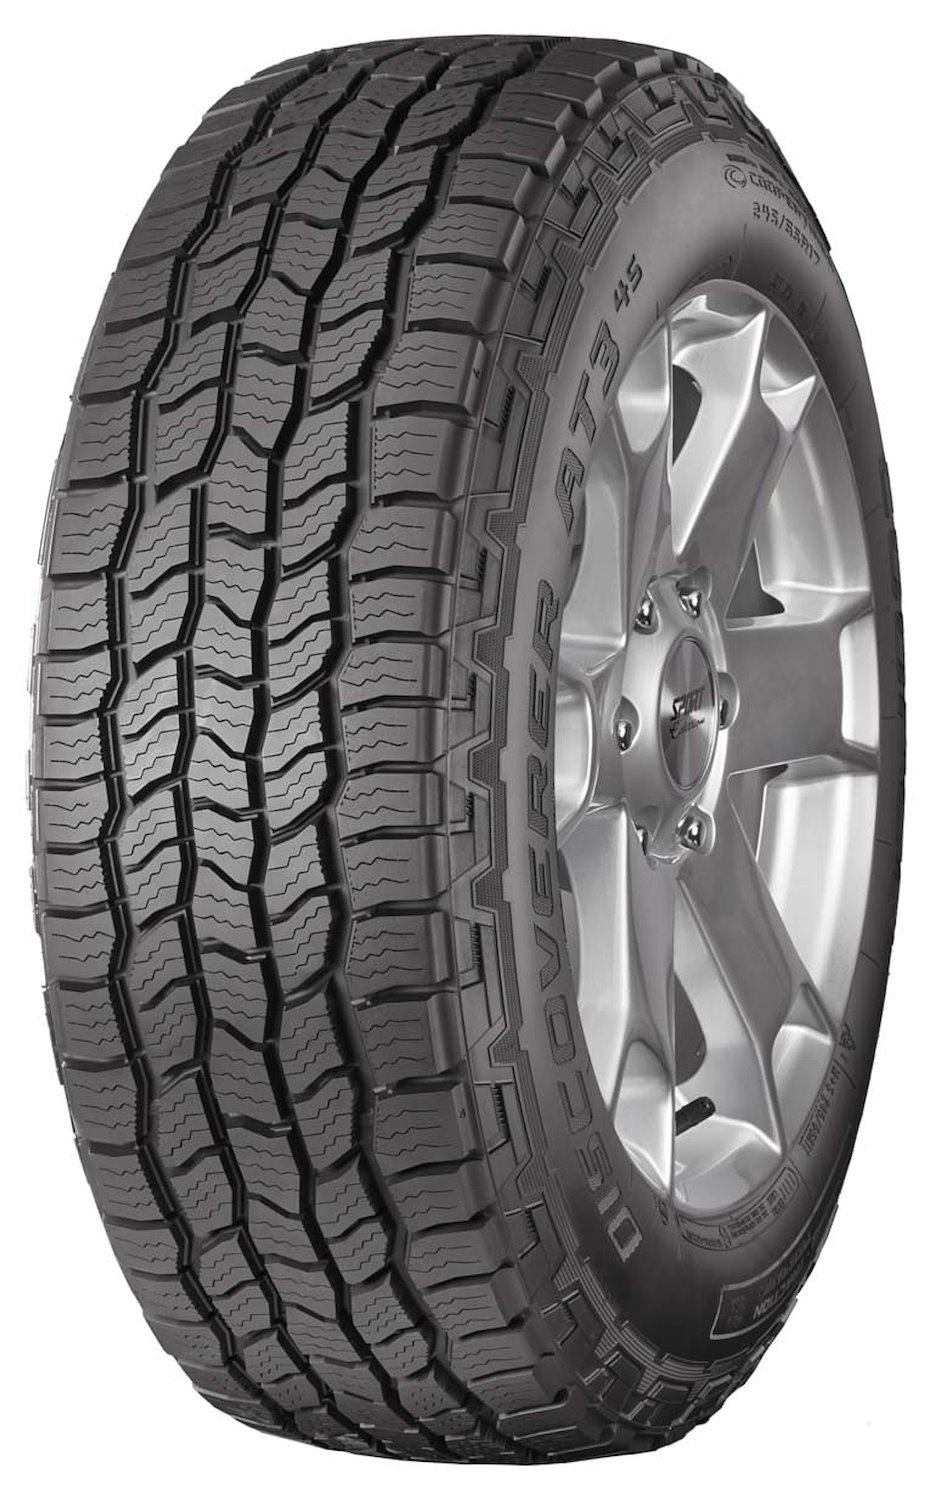 Discoverer AT3 4S All-Terrain Tire, 265/70R18